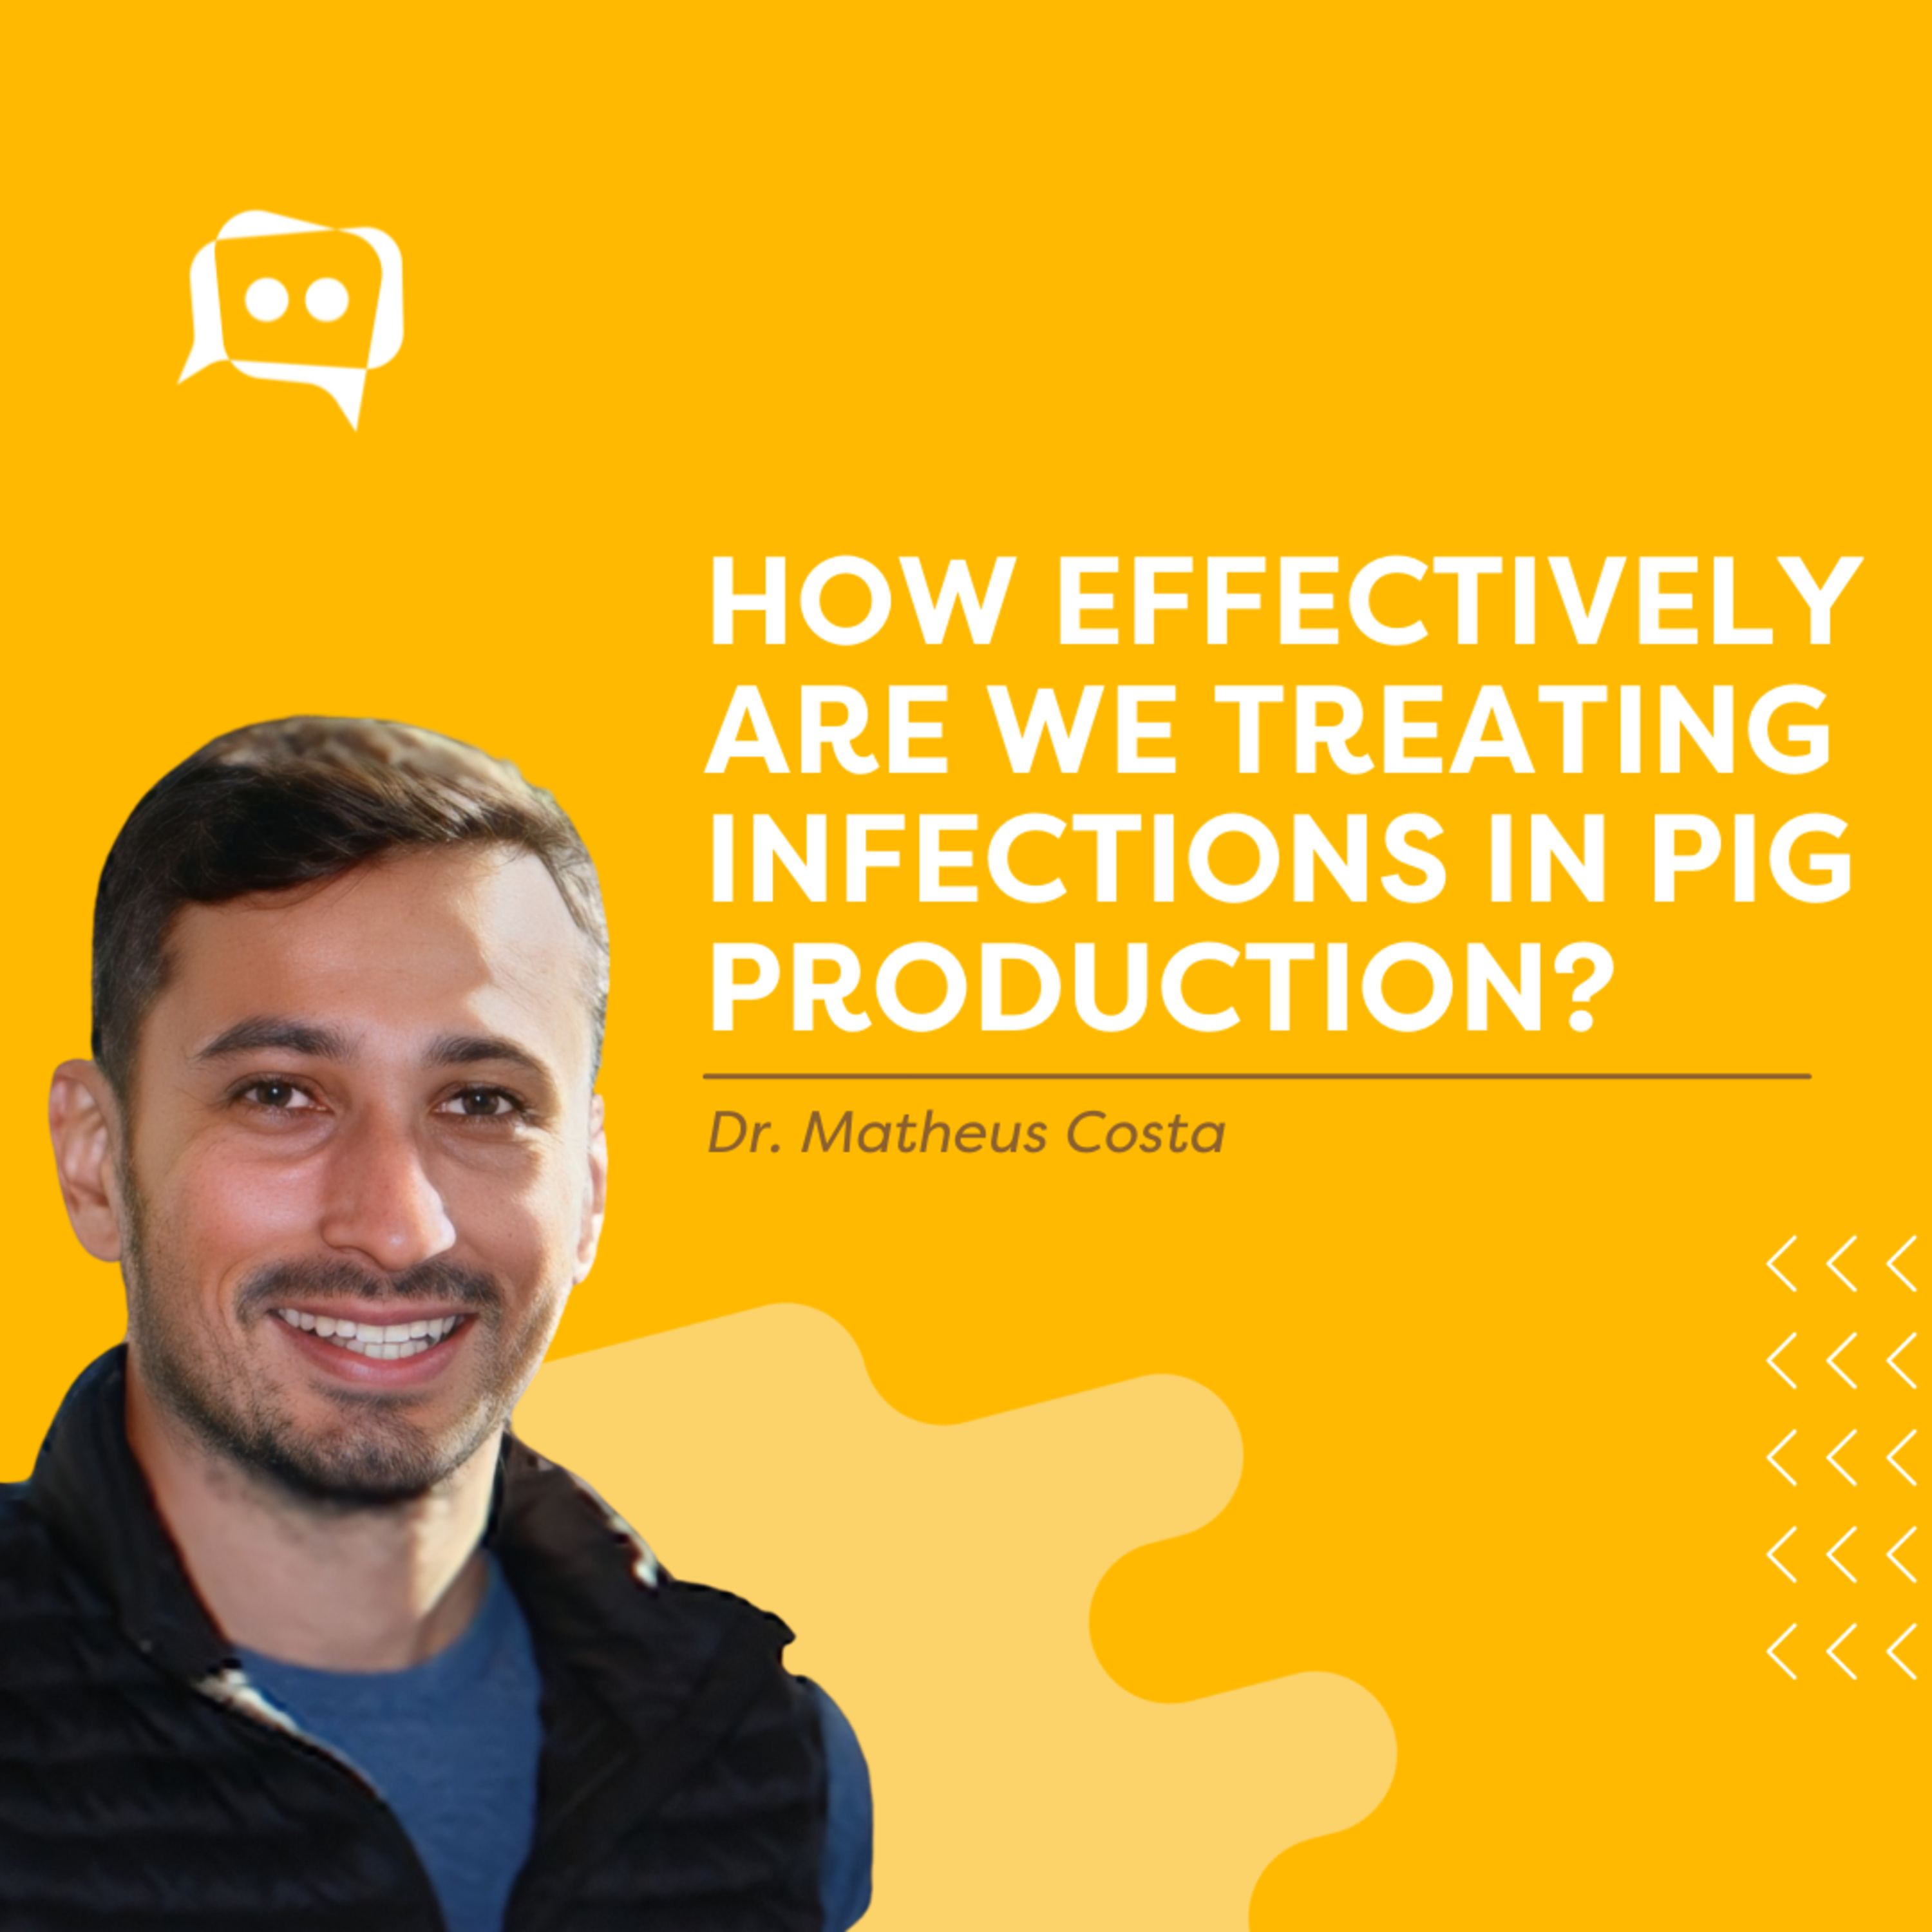 #SHORTS: How effectively are we treating infections in pig production? With Dr. Matheus Costa